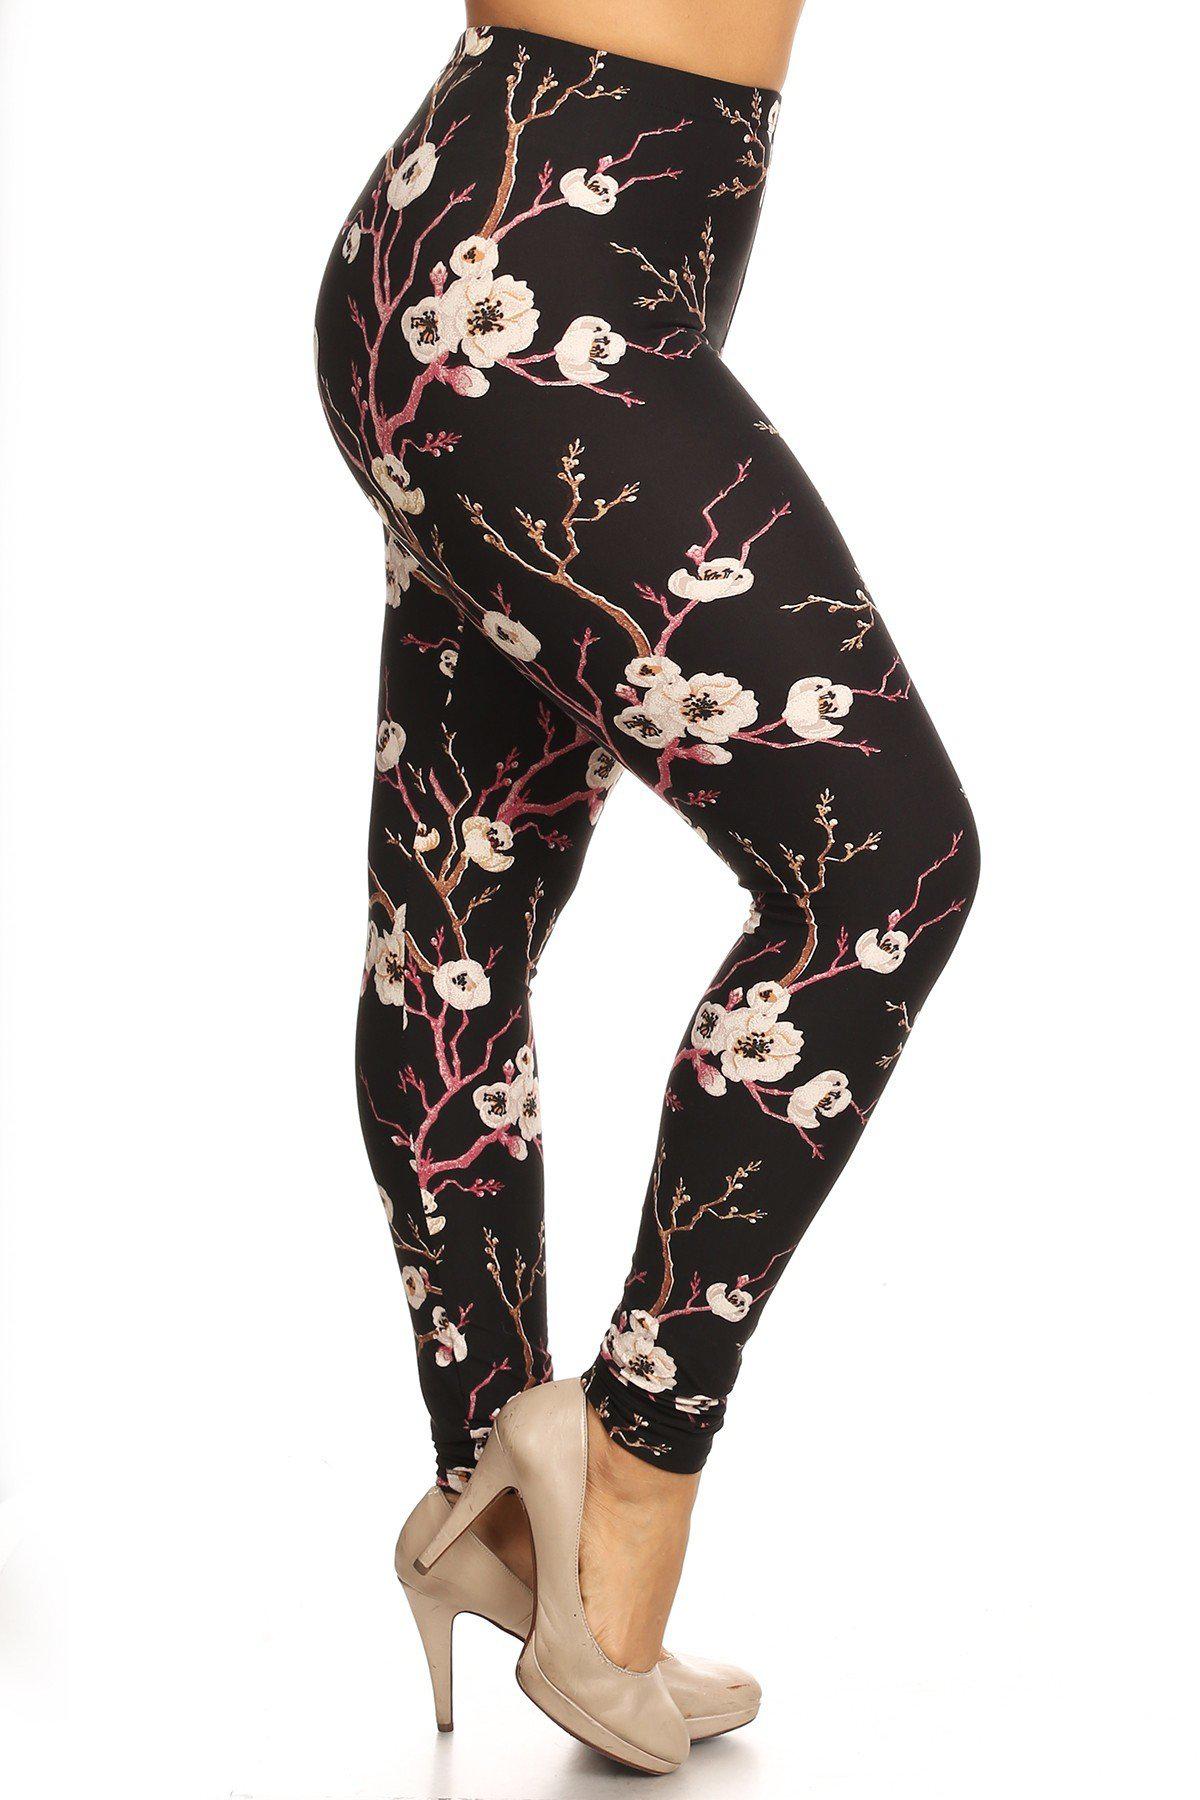 Plus Size Floral Print, Full Length Leggings In A Slim Fitting Style With A Banded High Waist-[Adult]-[Female]-Multi-Blue Zone Planet